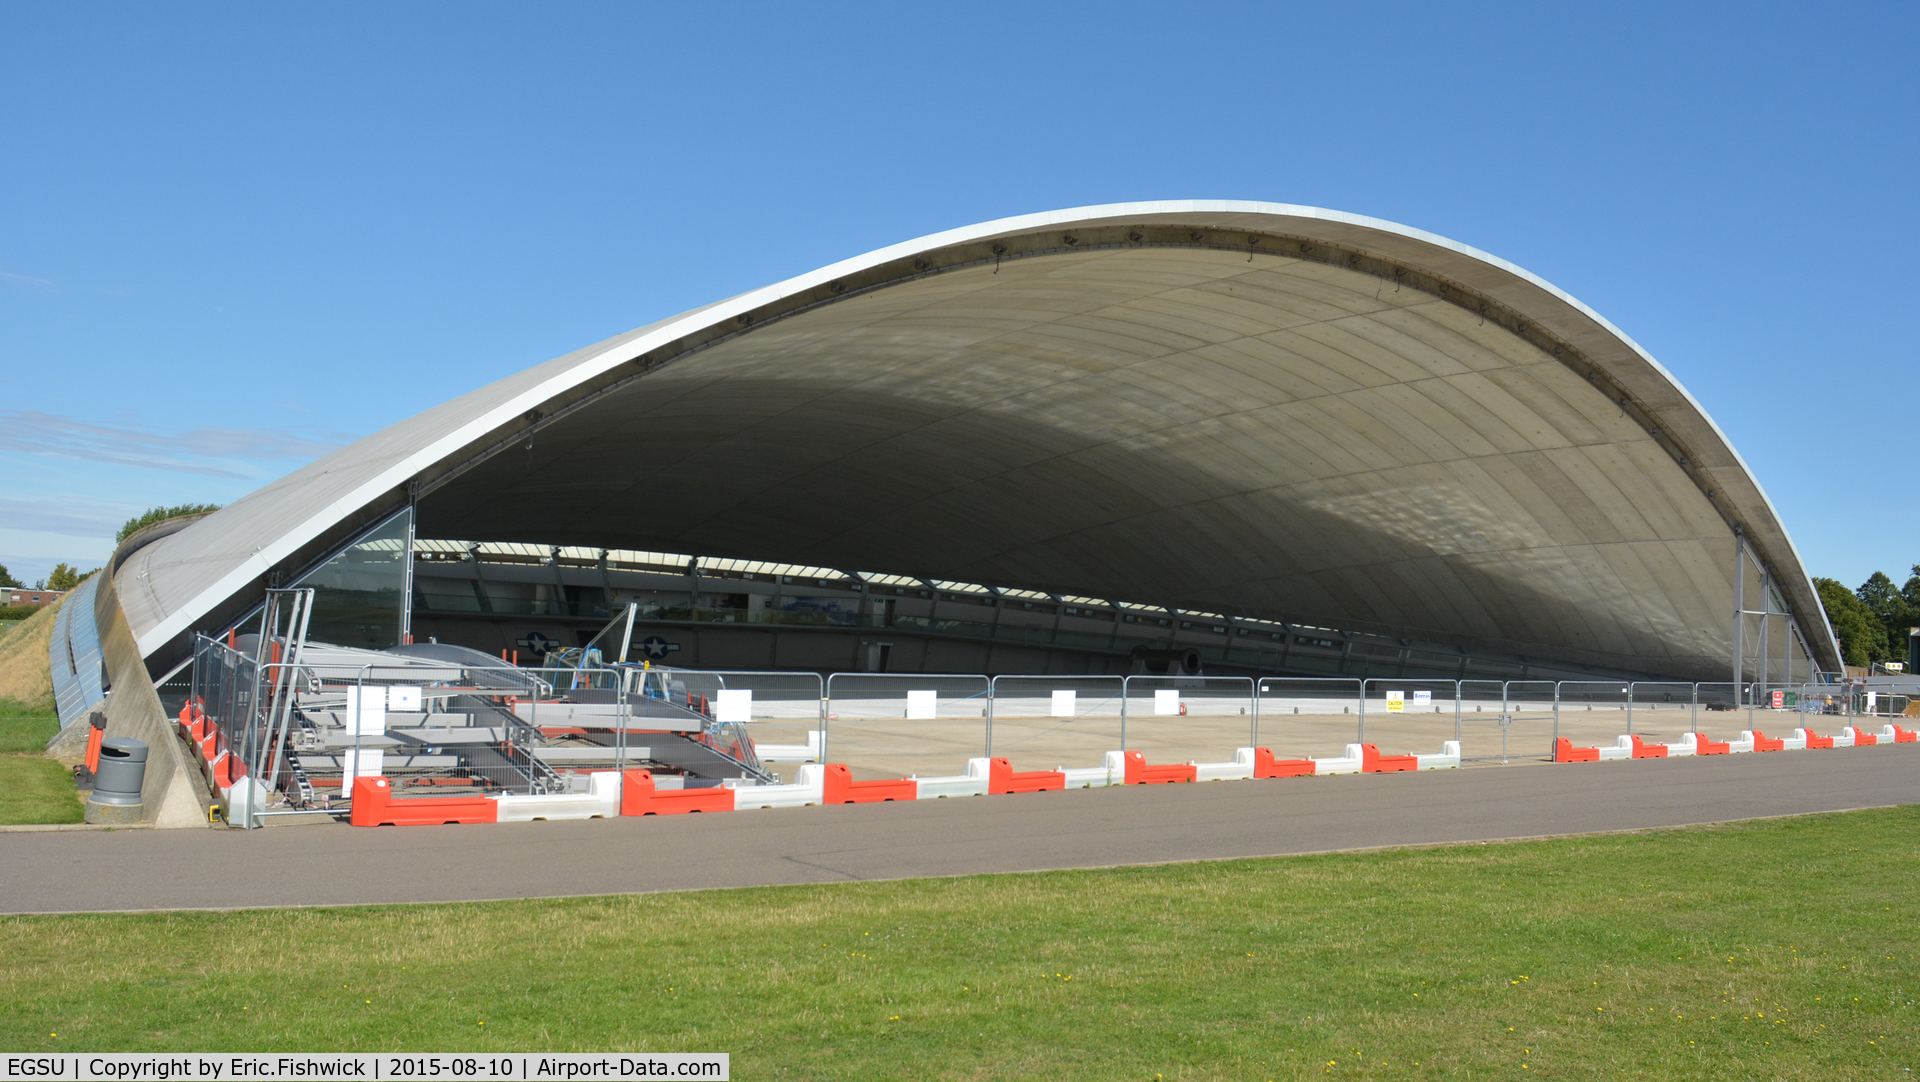 Duxford Airport, Cambridge, England United Kingdom (EGSU) - Revealed in all its glory - The magnificent American Air Museum building designed by Lord Norman Foster - The Imperial War Museum, Duxford, Cambridgeshire.